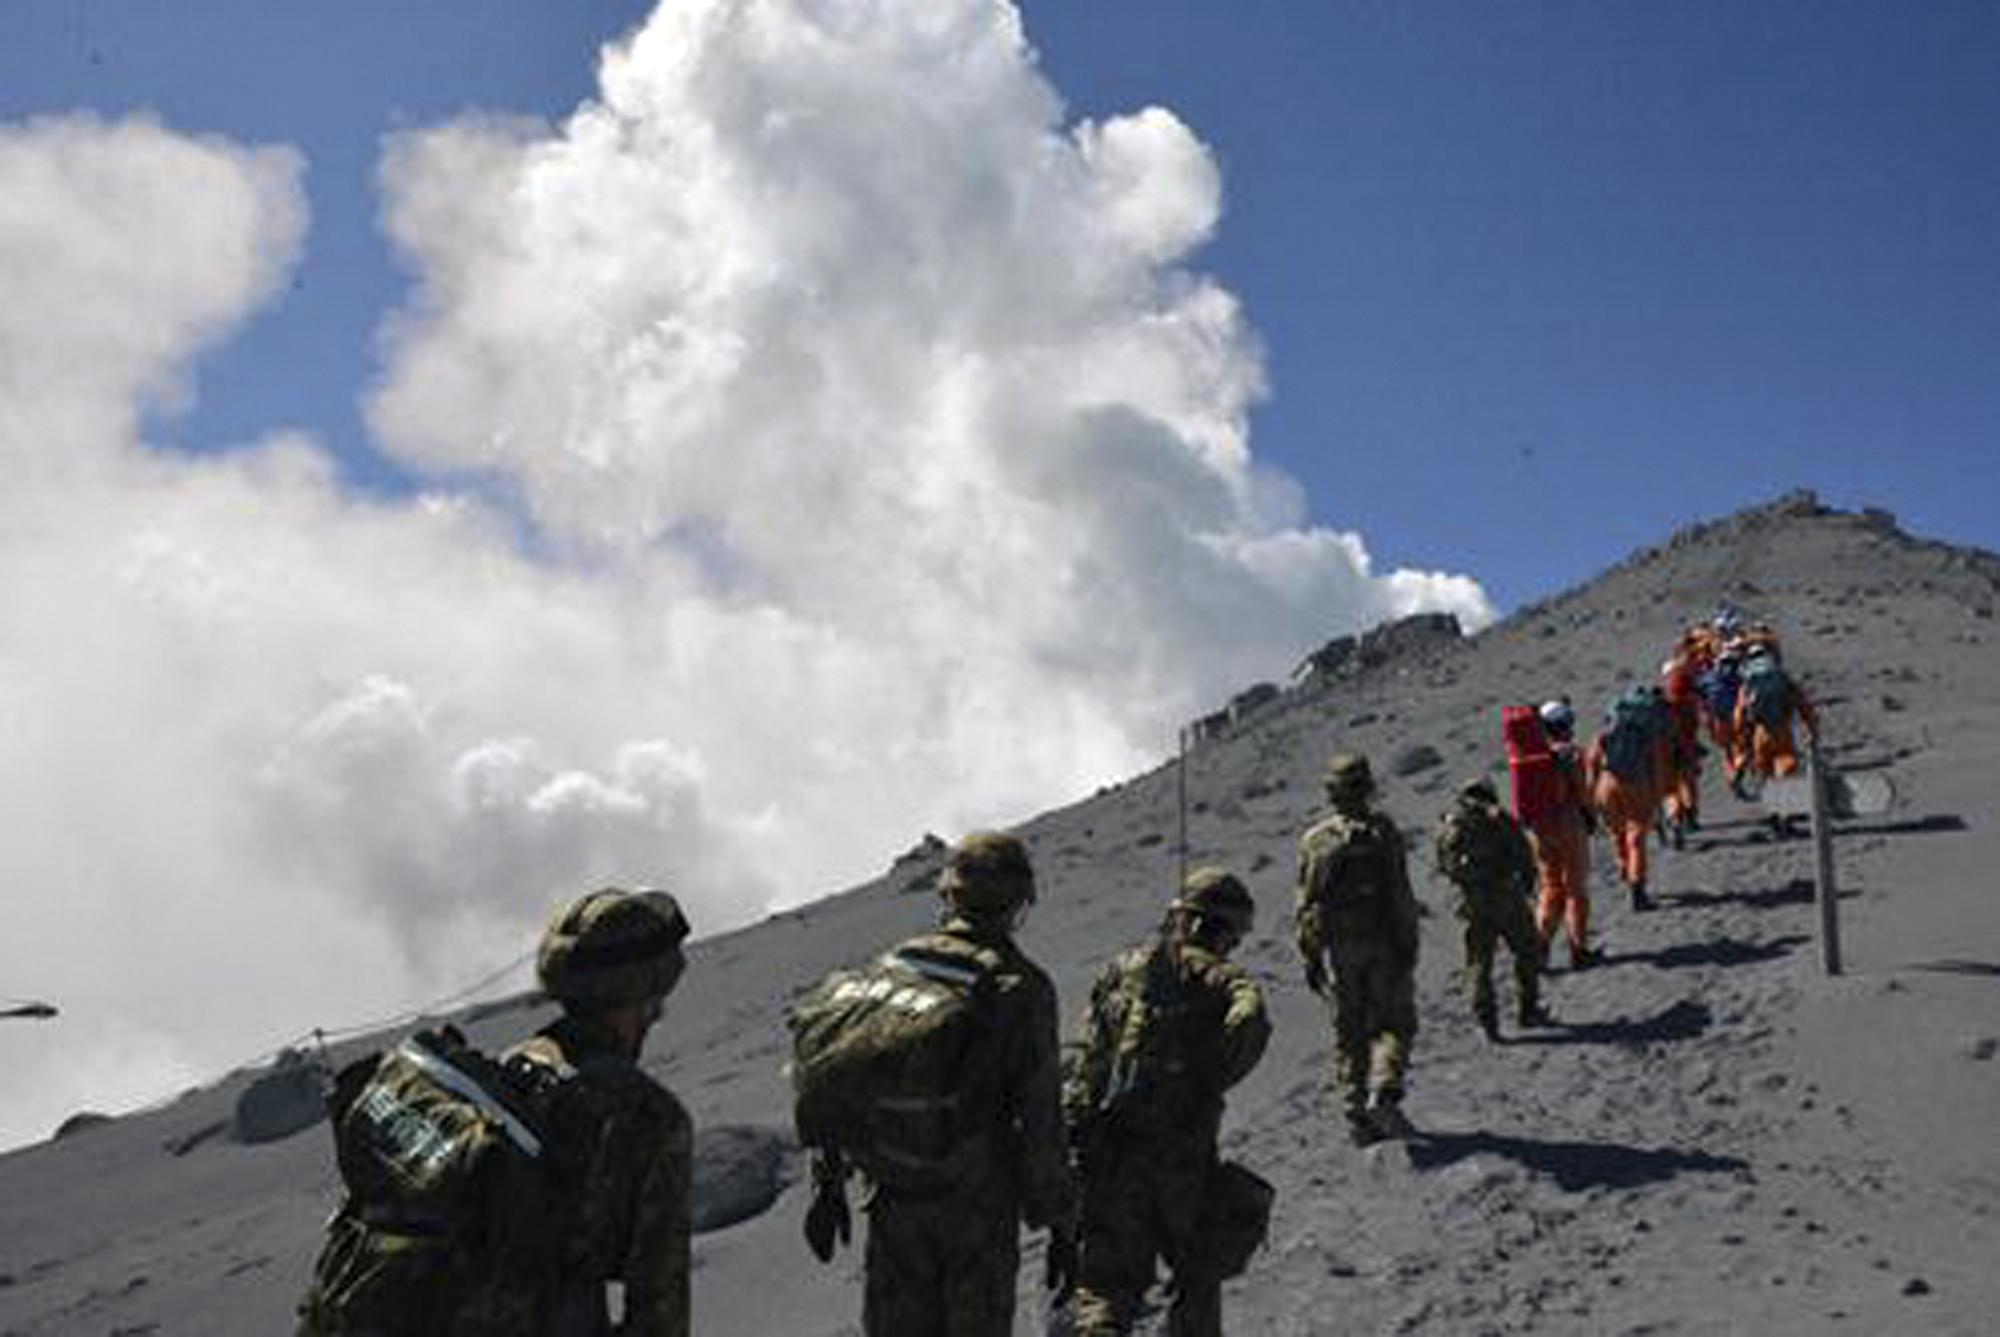 PHOTO: JGSDF personnel and fire fighters head for the summit of Mount Ontake to rescue people who have been trapped in the mountaintop lodge one day after the volcano became active in central Japan, Sept. 28, 2014.